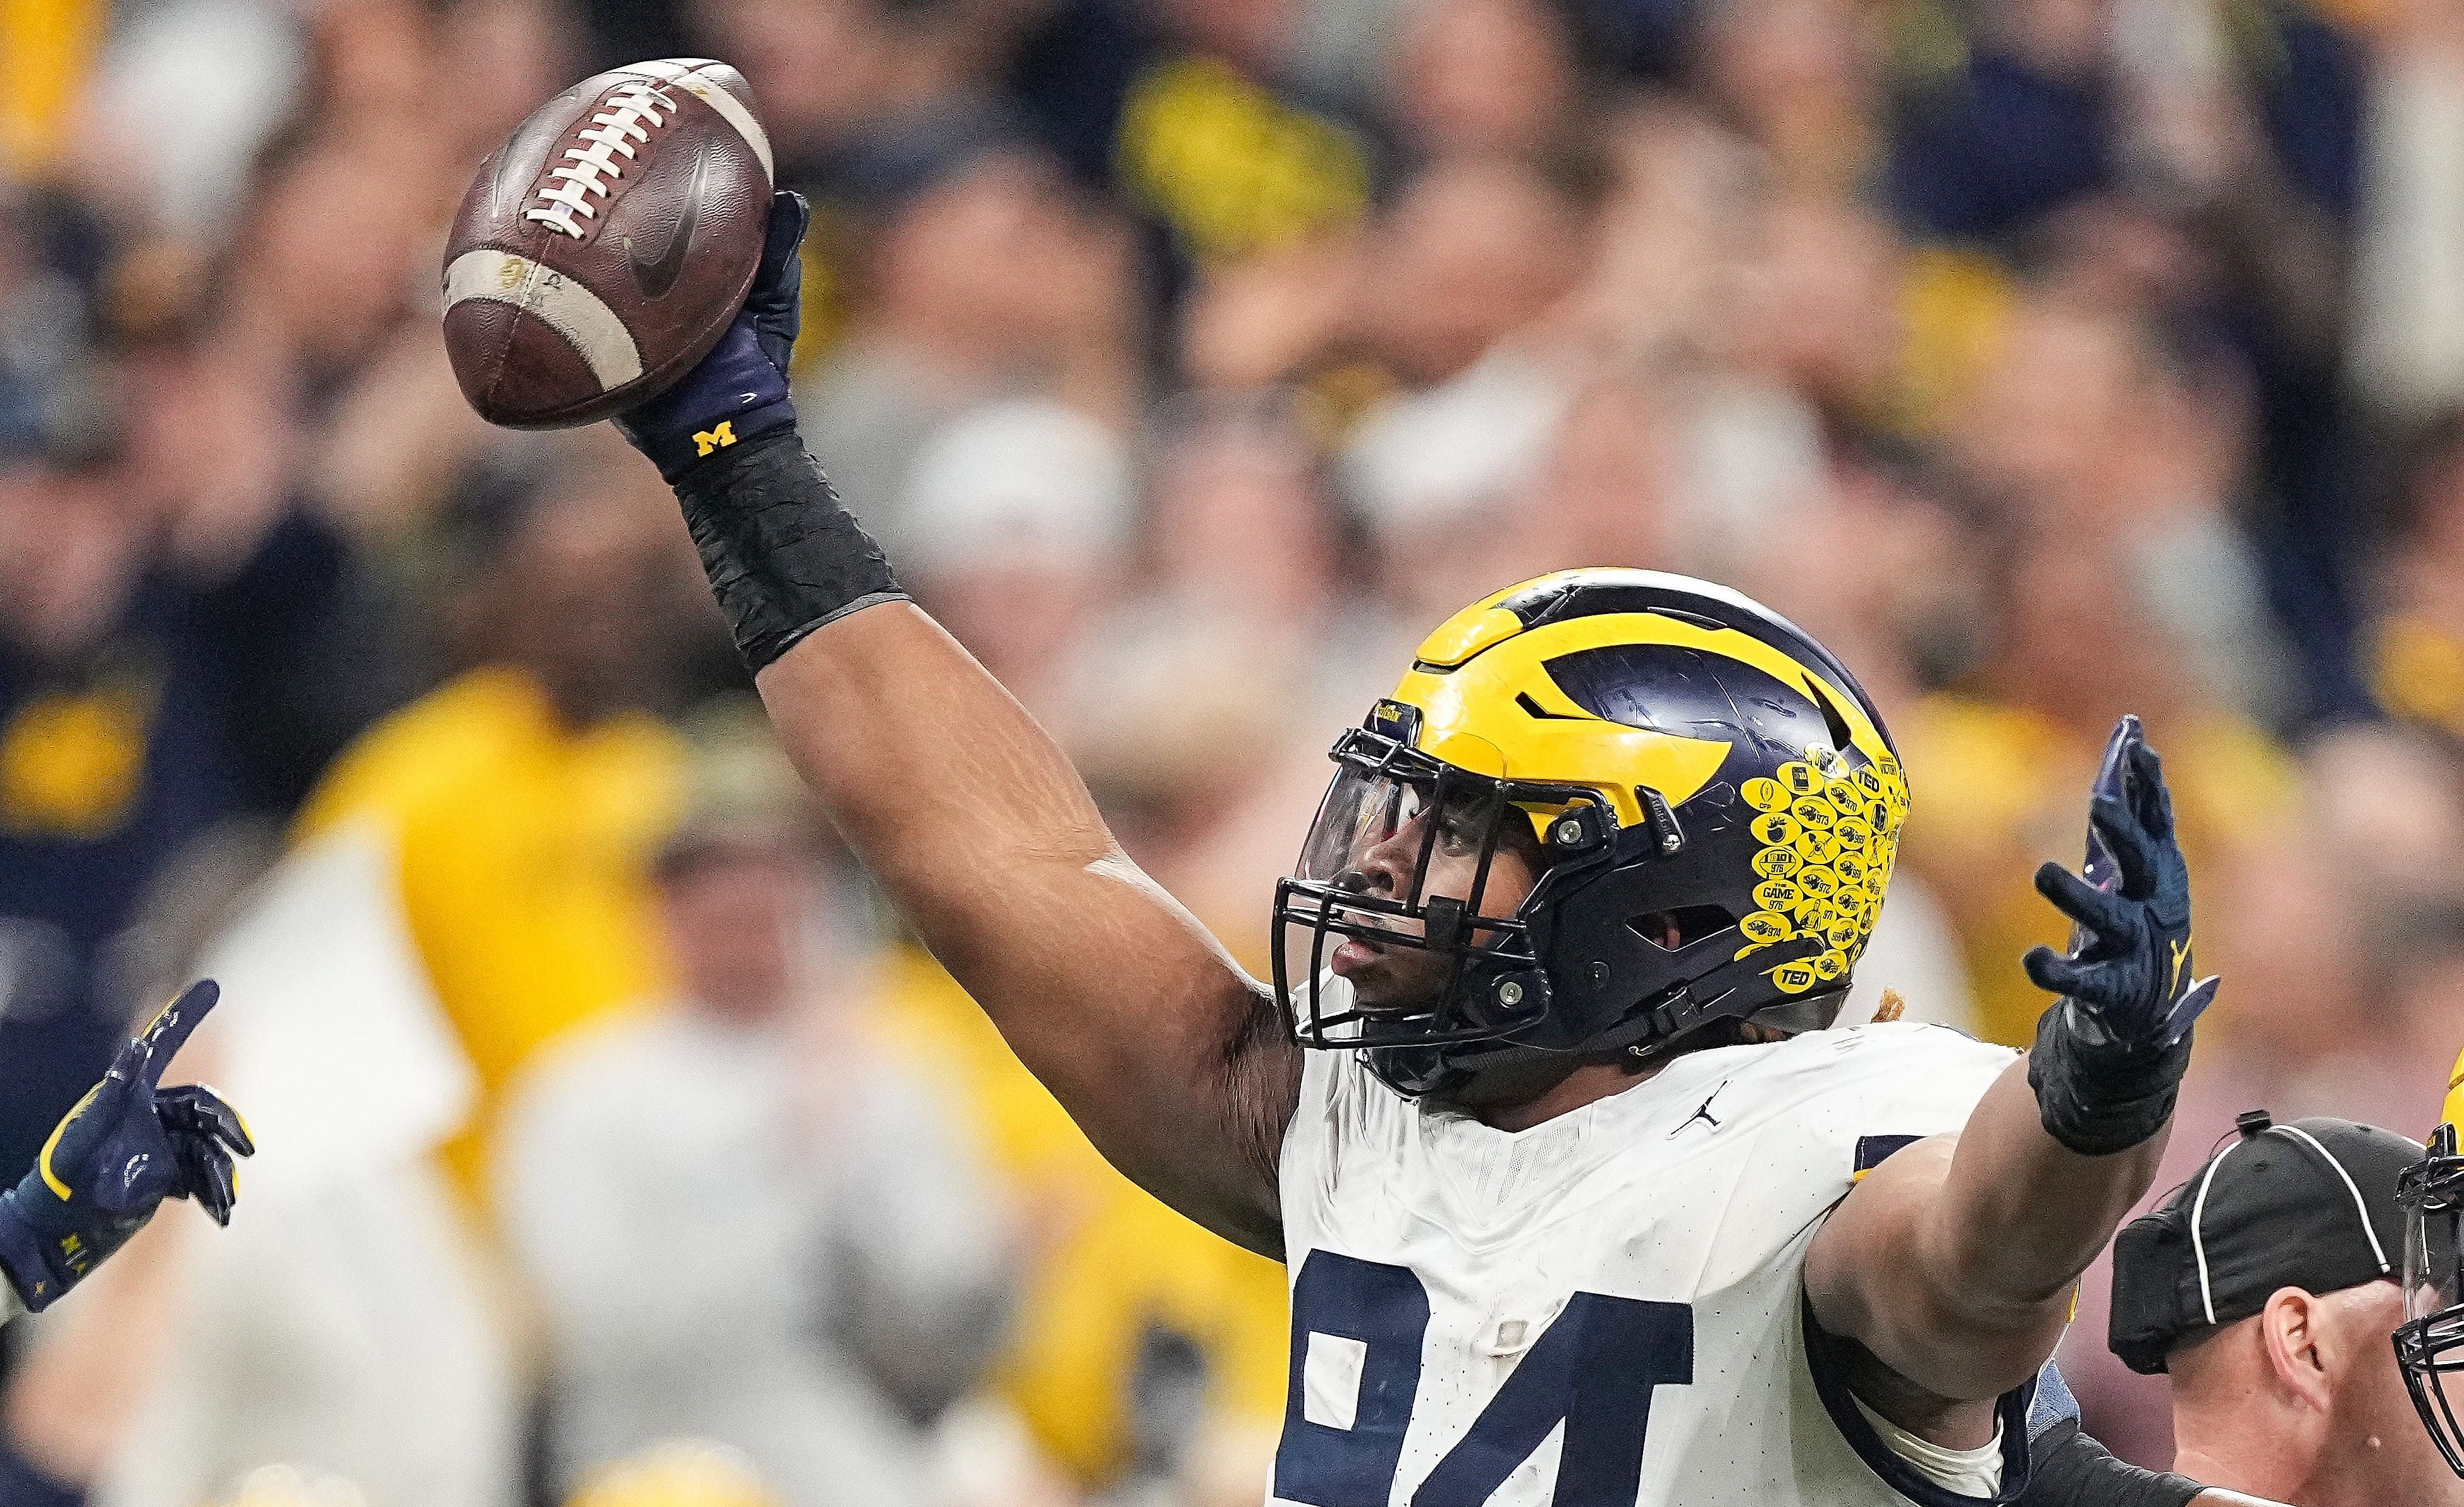 Michigan defensive line standout Kris Jenkins is a likely second round pick in the NFL Draft.